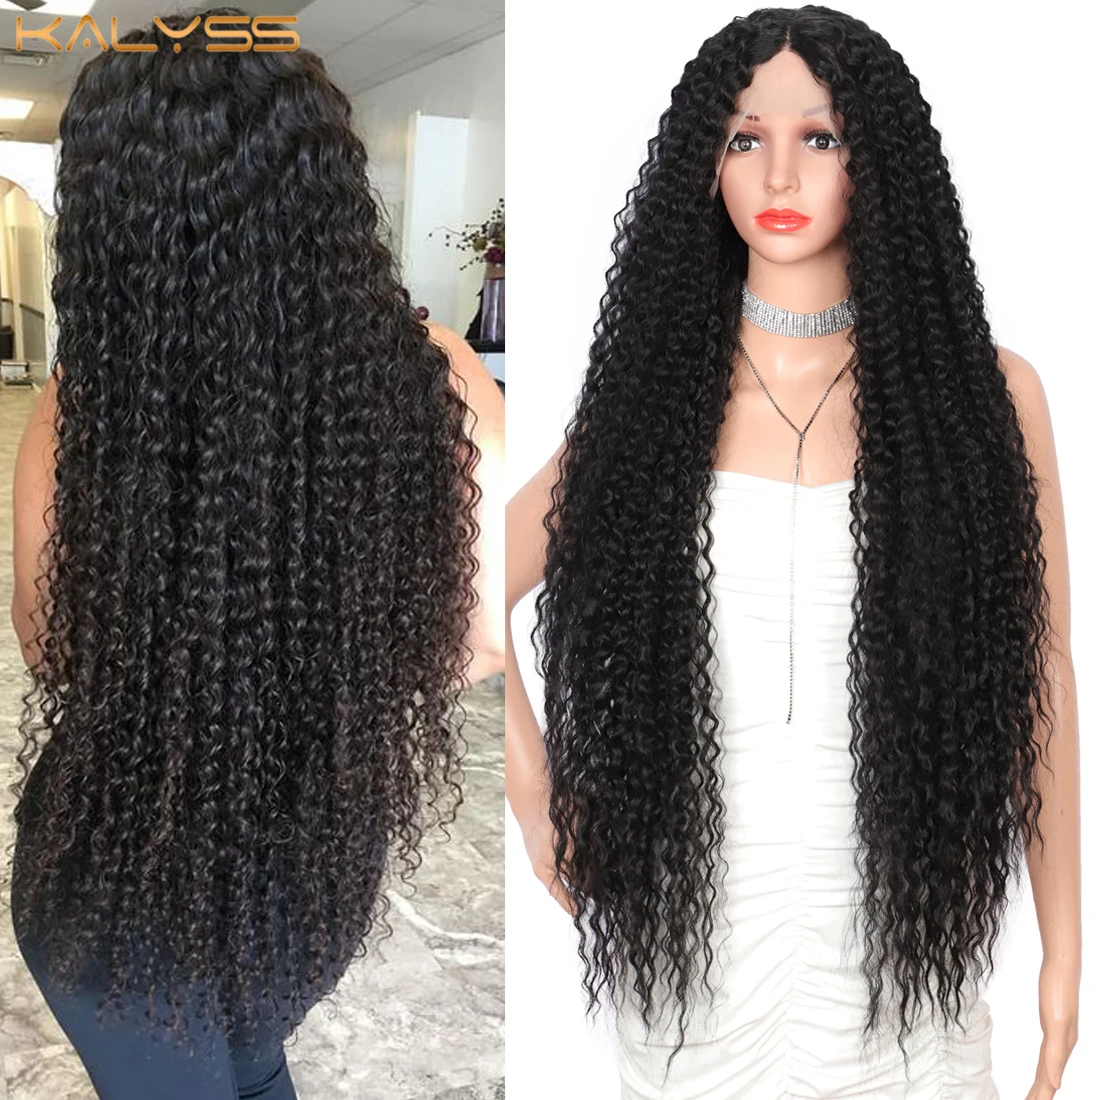 Kalyss Super Long Curly Lace Front Wigs For Women 38 Inches Long Losse Curly Wigs Natural Looking Synthetic Wig